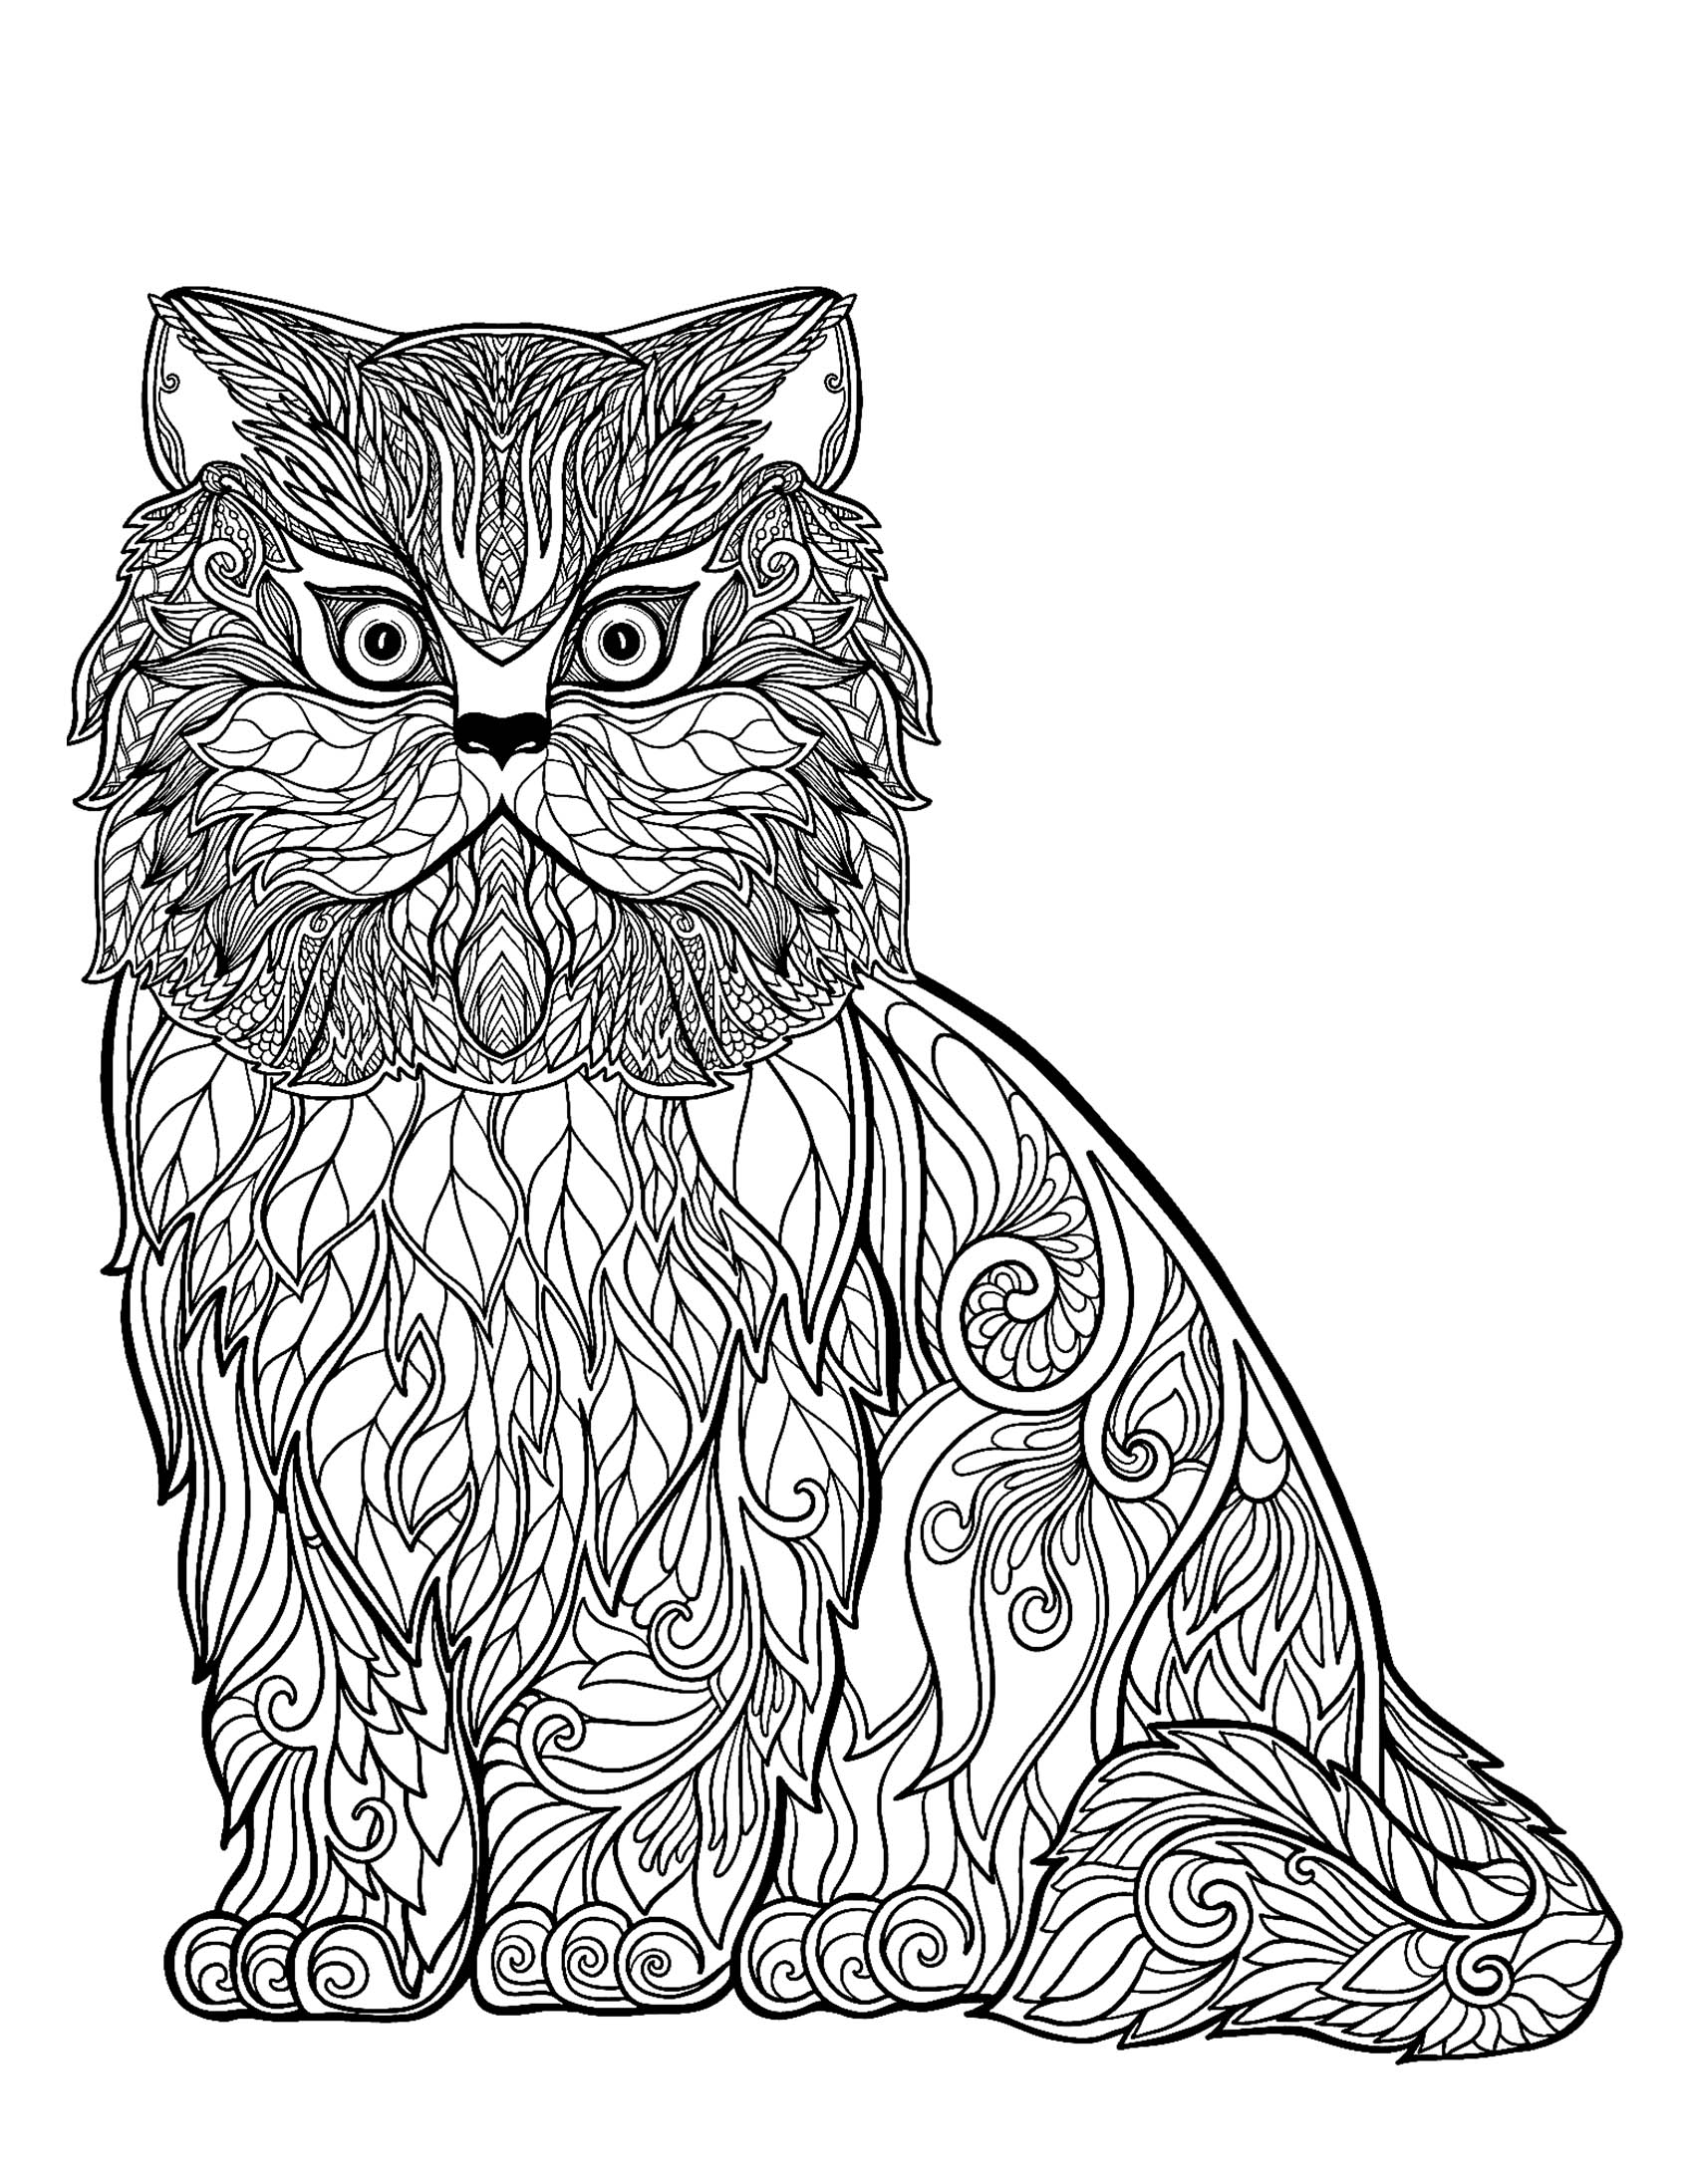 Free cat drawing to print and color - Cats Kids Coloring Pages